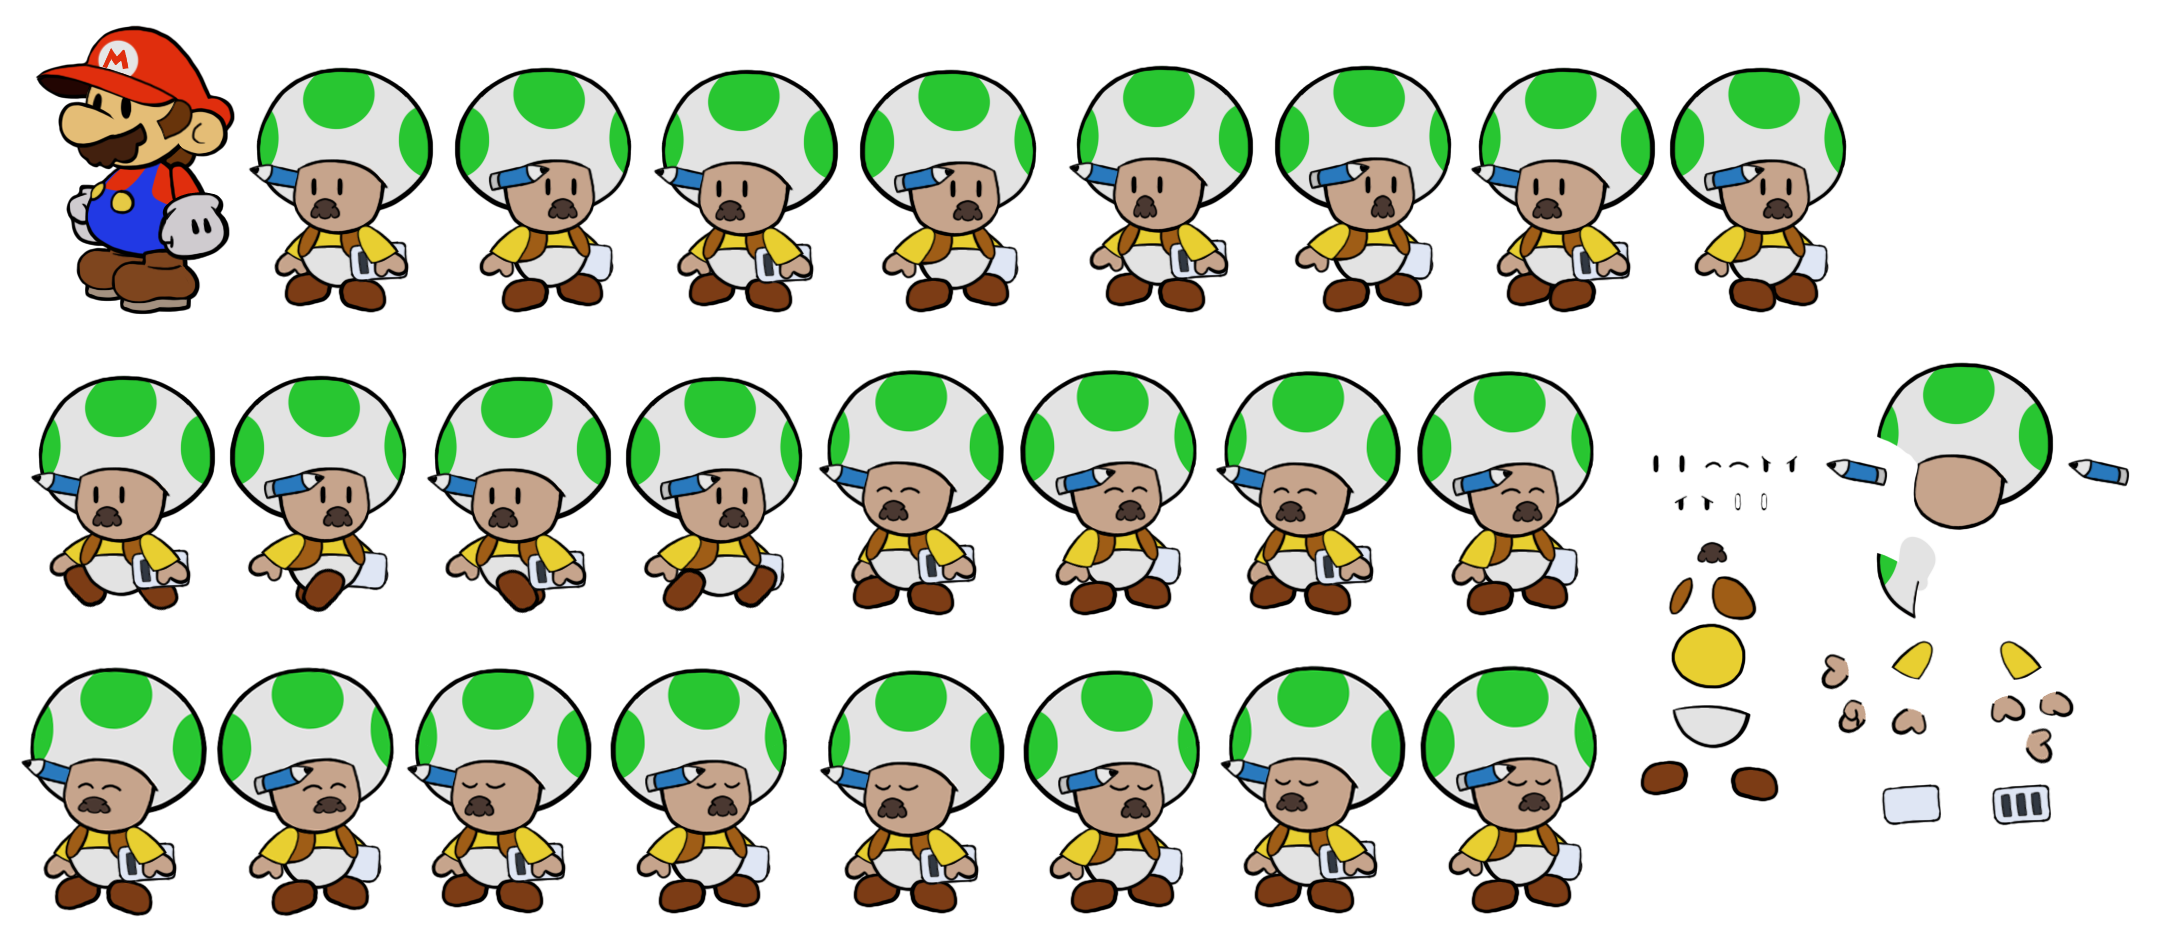 Paper Mario Customs - Shop Toads (The Thousand-Year Door, Paper Mario-Style)